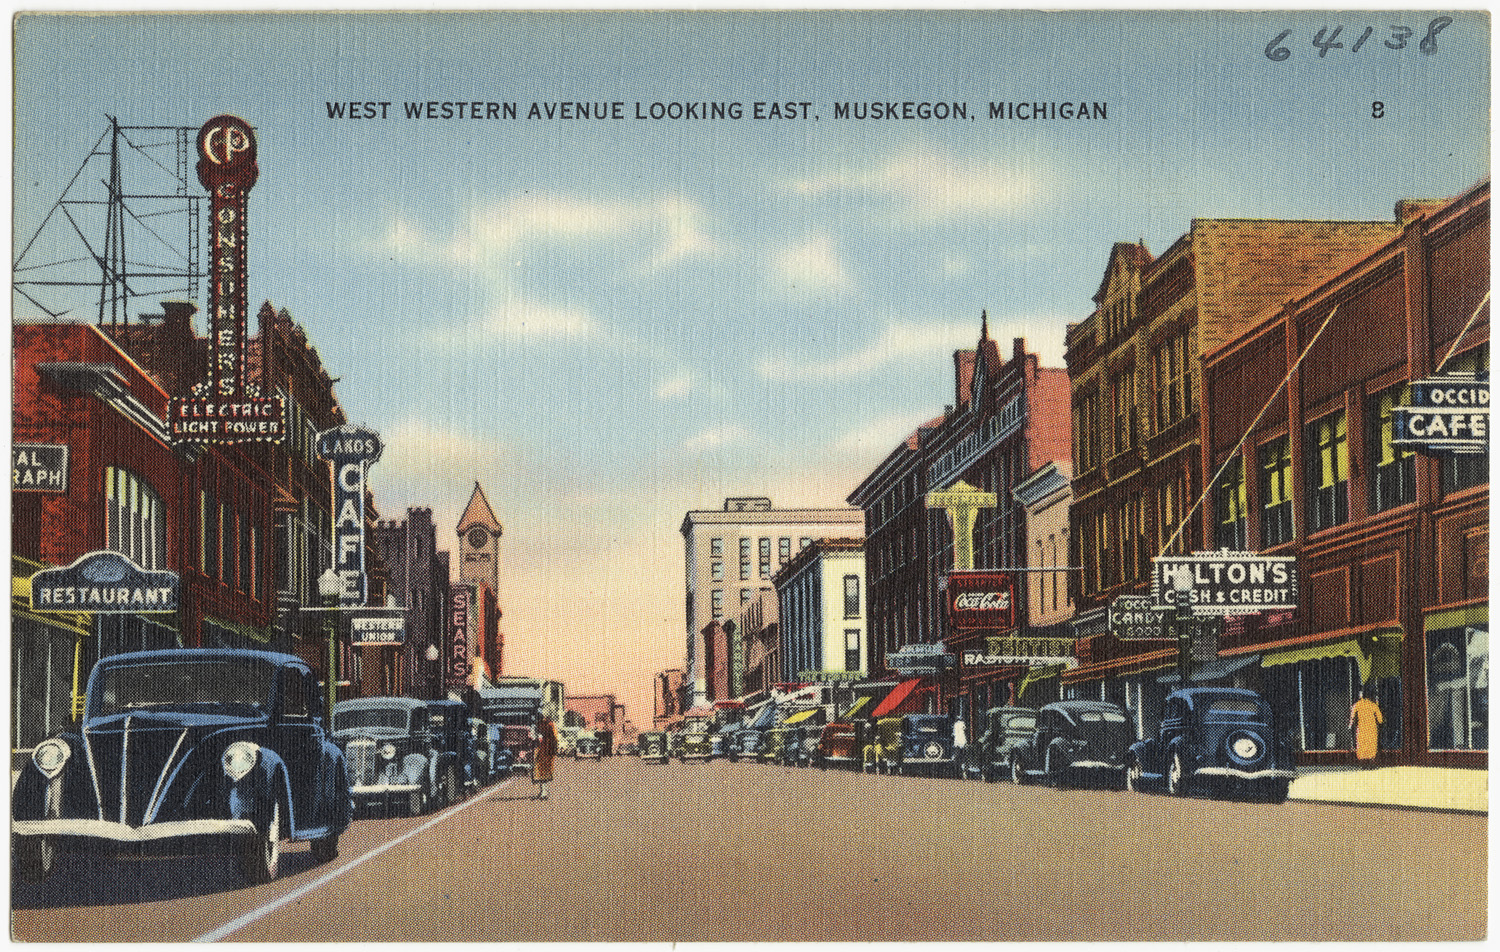 Picutre of historical western ave in Muskegon MI